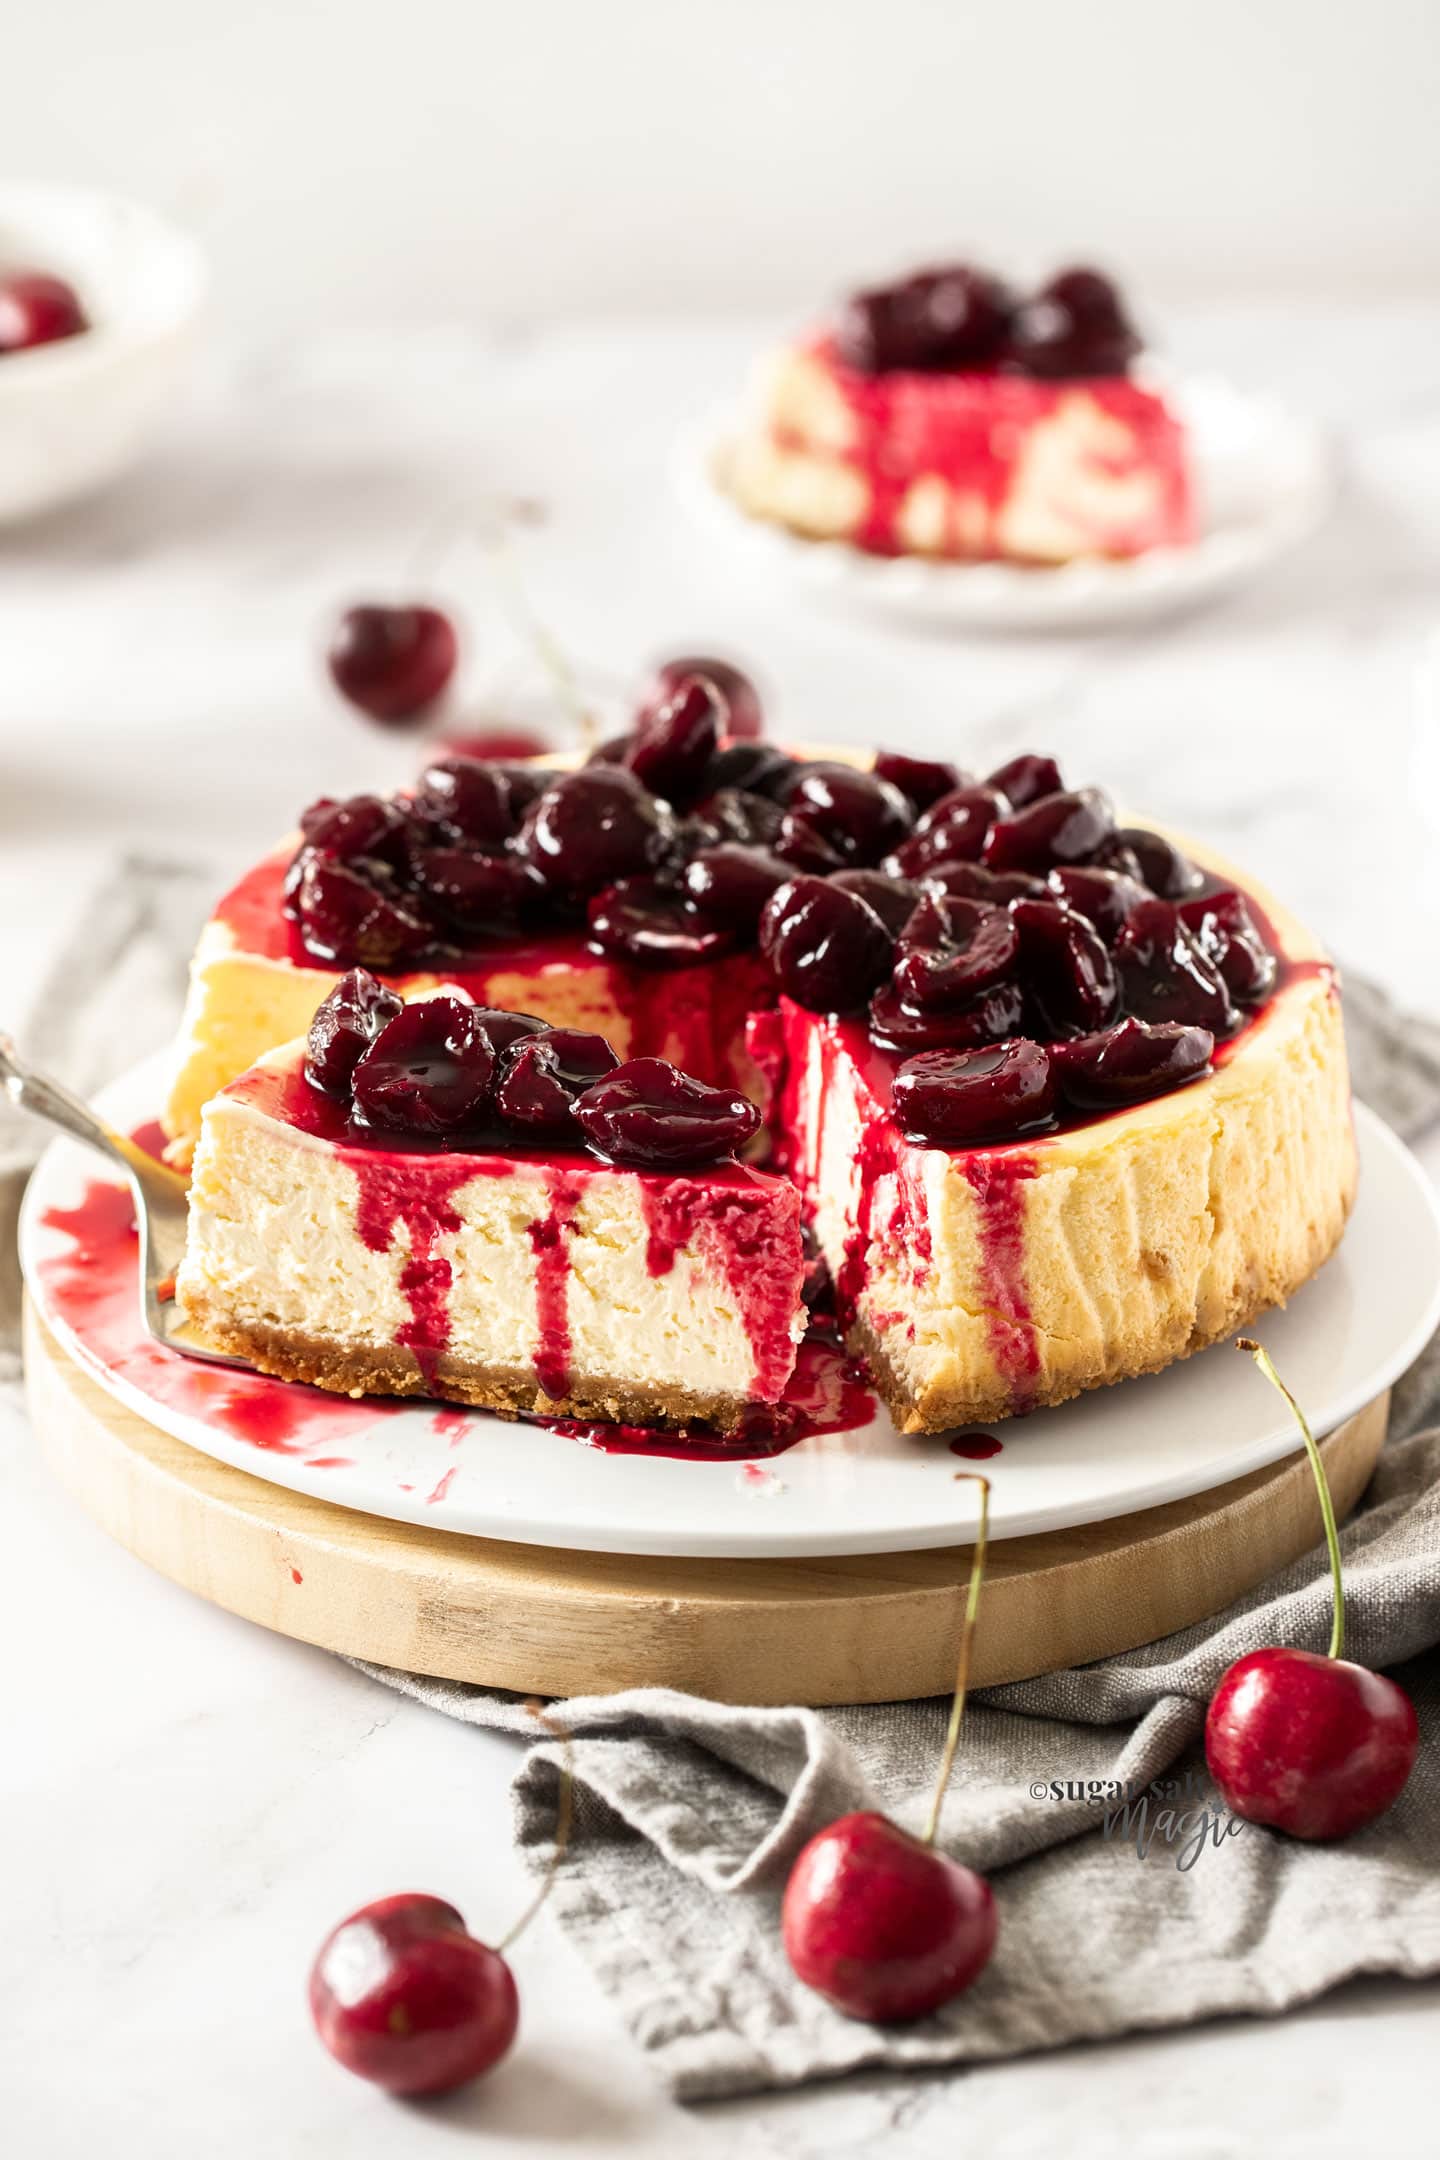 A cherry topped cheesecake on a white cake plaet with a slice in the background.